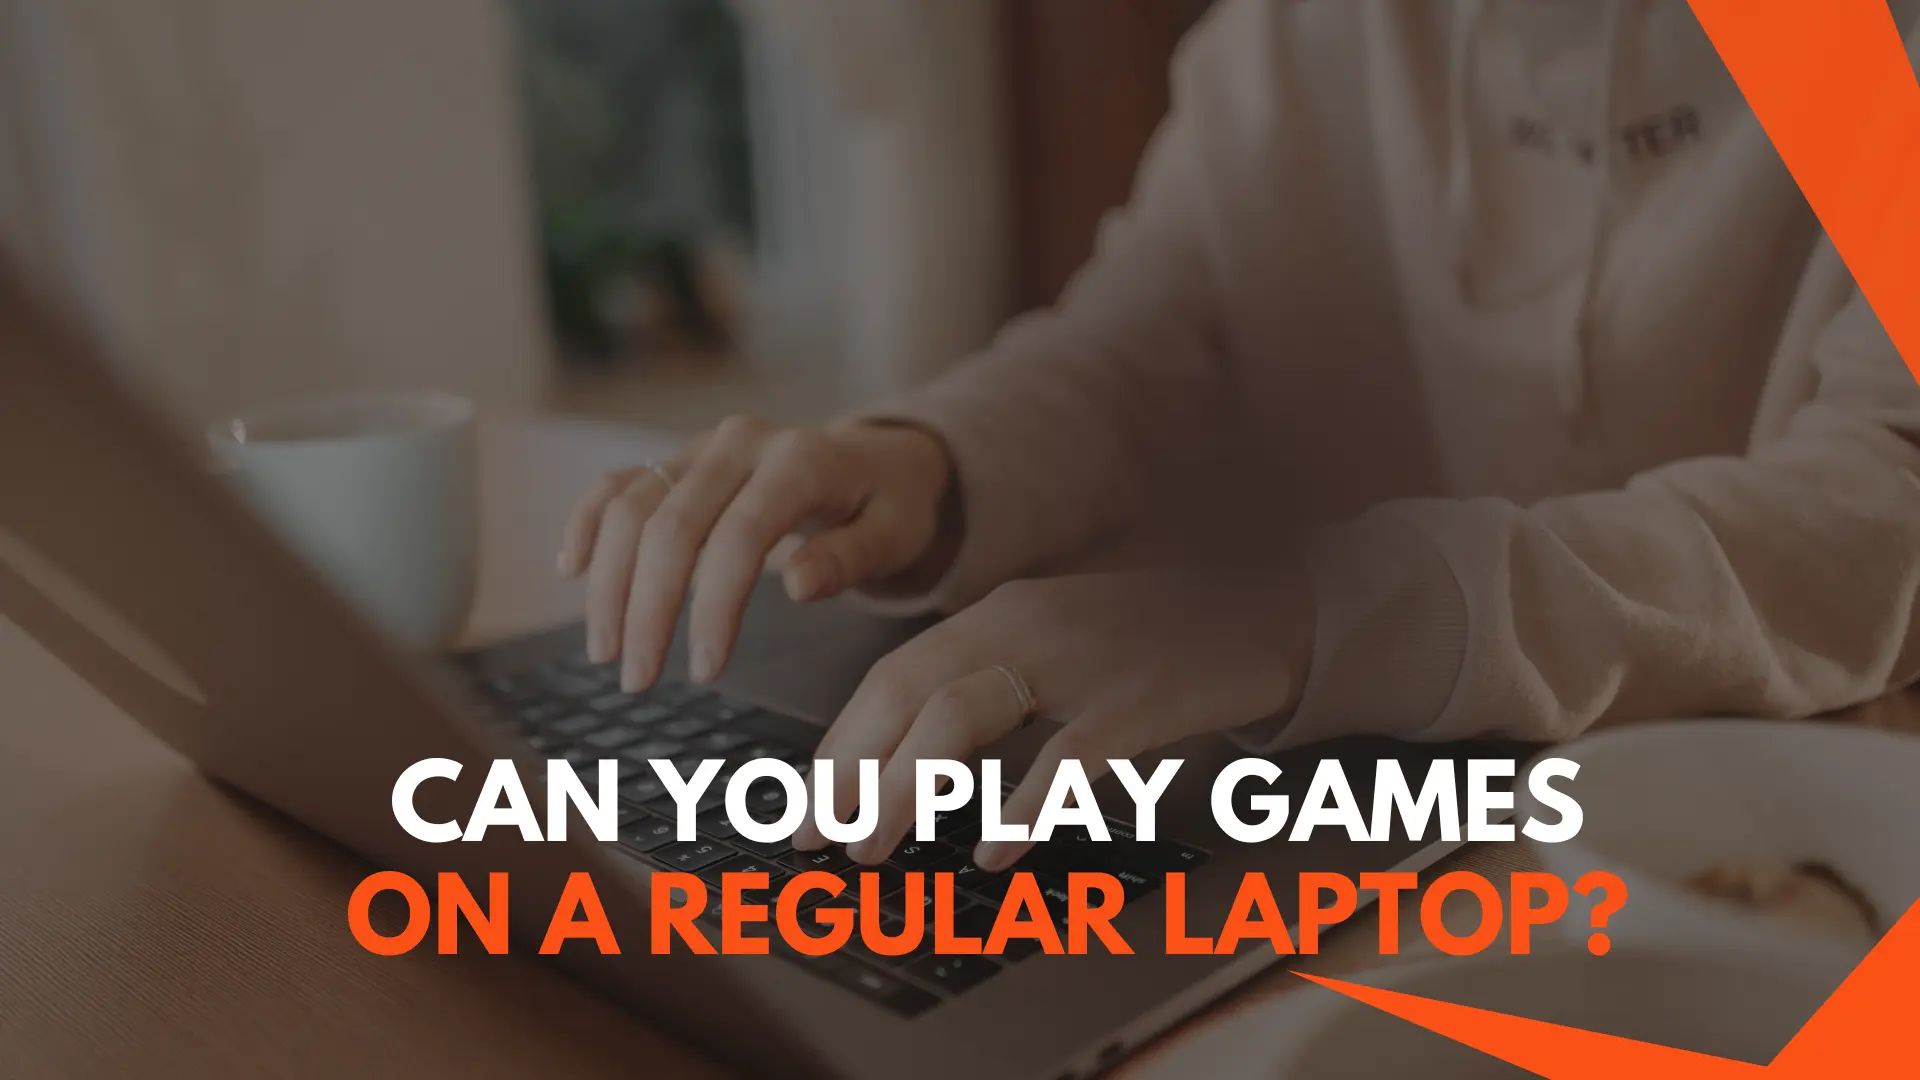 Can You Play Games on a Regular Laptop?